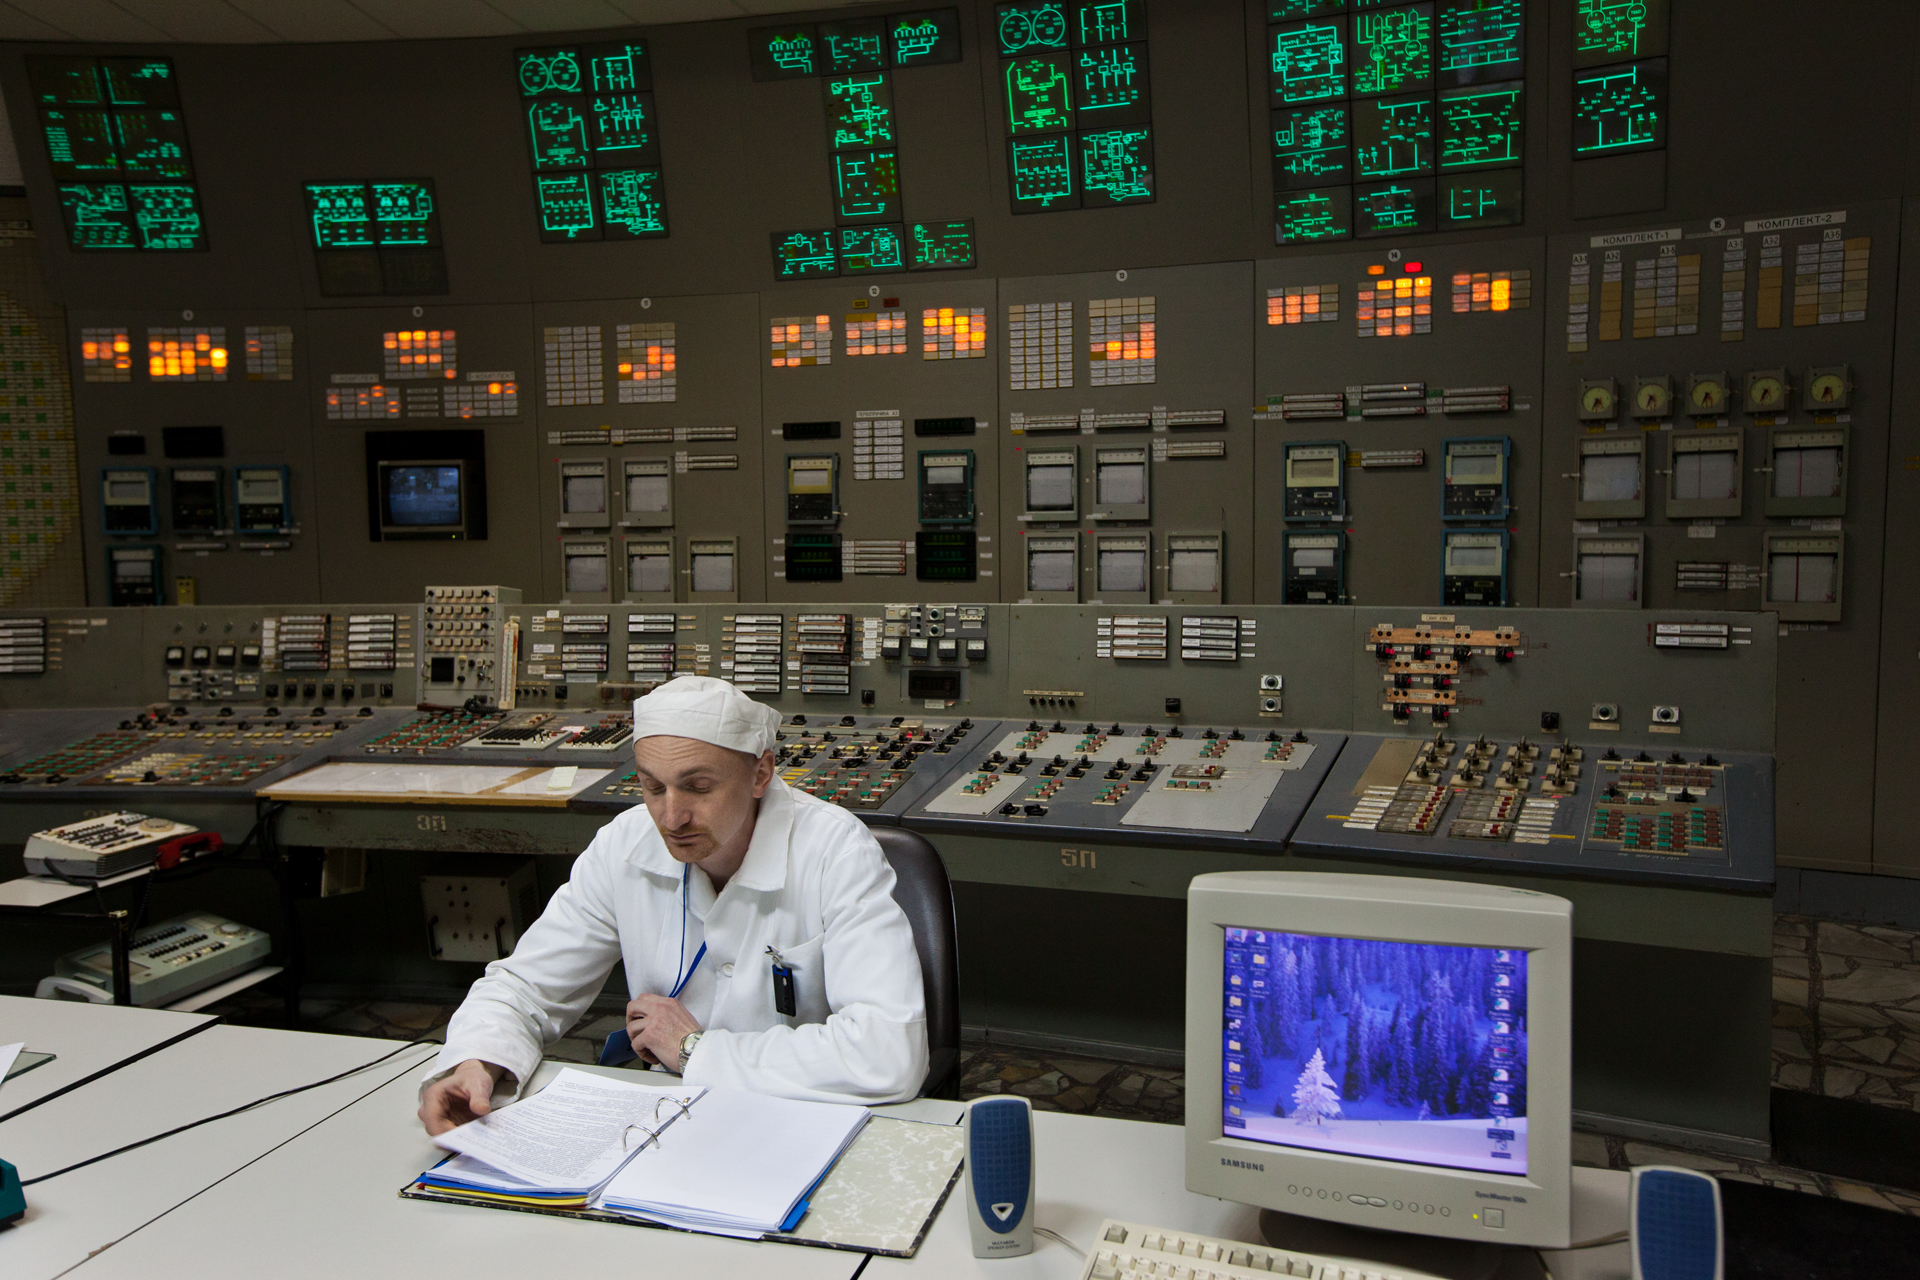  An engineer maintains the safety systems in the control room of reactor #3, identical to the one of reactor #4 where the fatal mistake occurred in 1986.  Chernobyl Nuclear Power Plant, Ukraine  